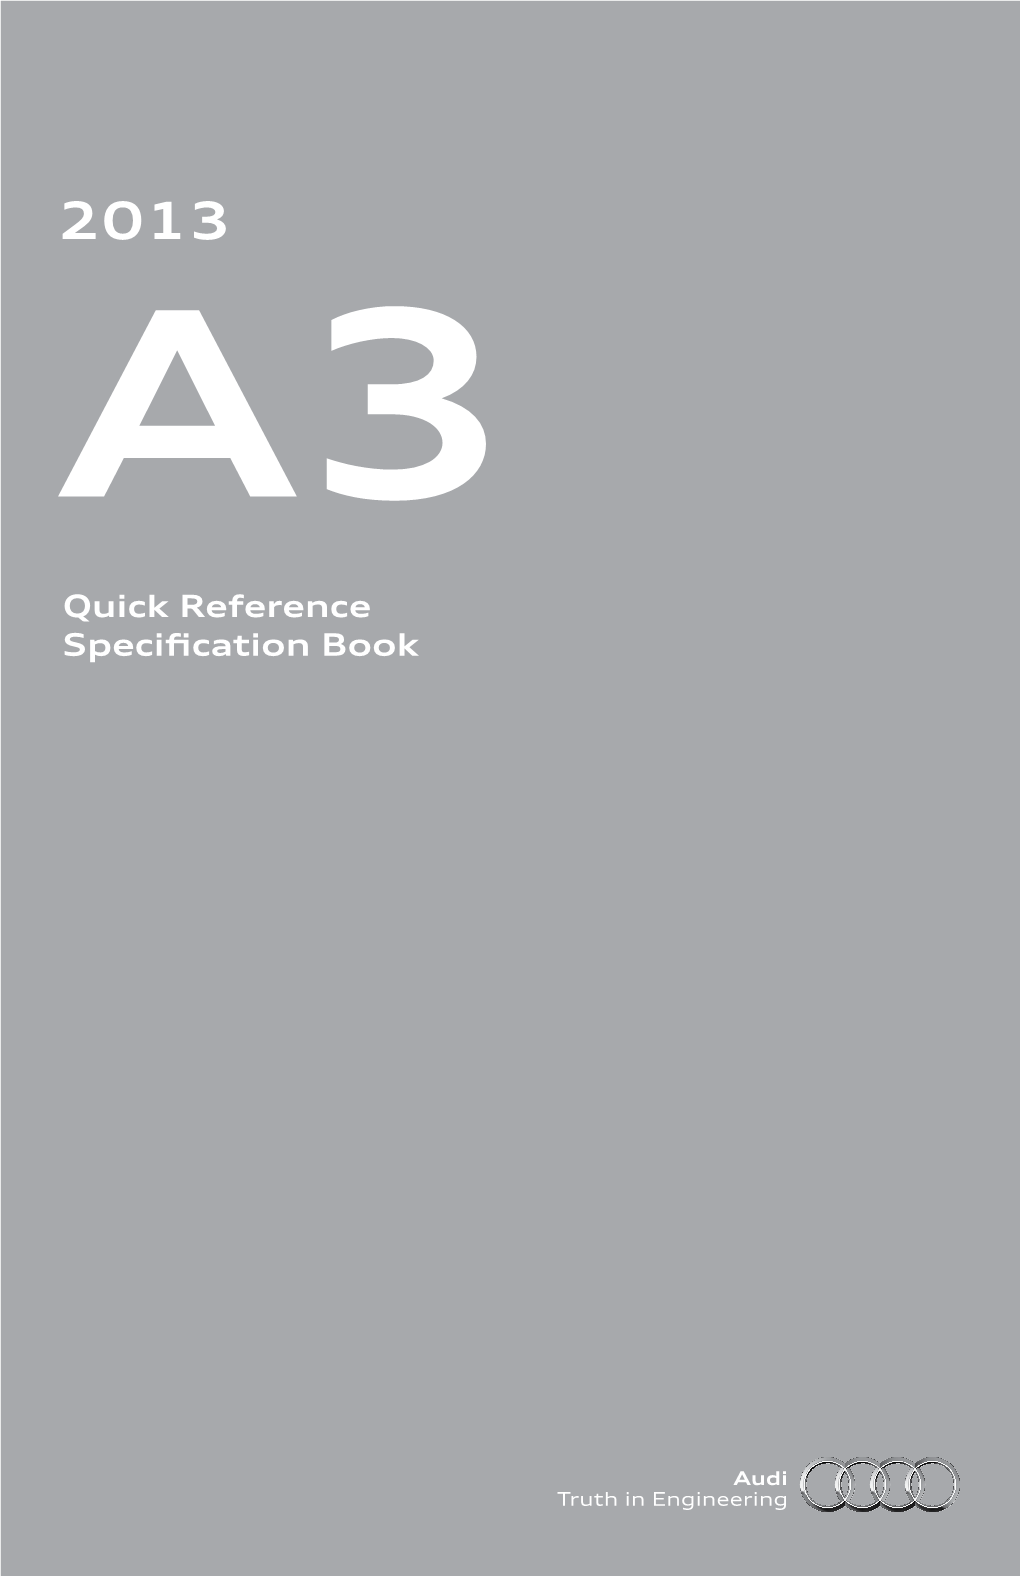 Quick Reference Specification Book